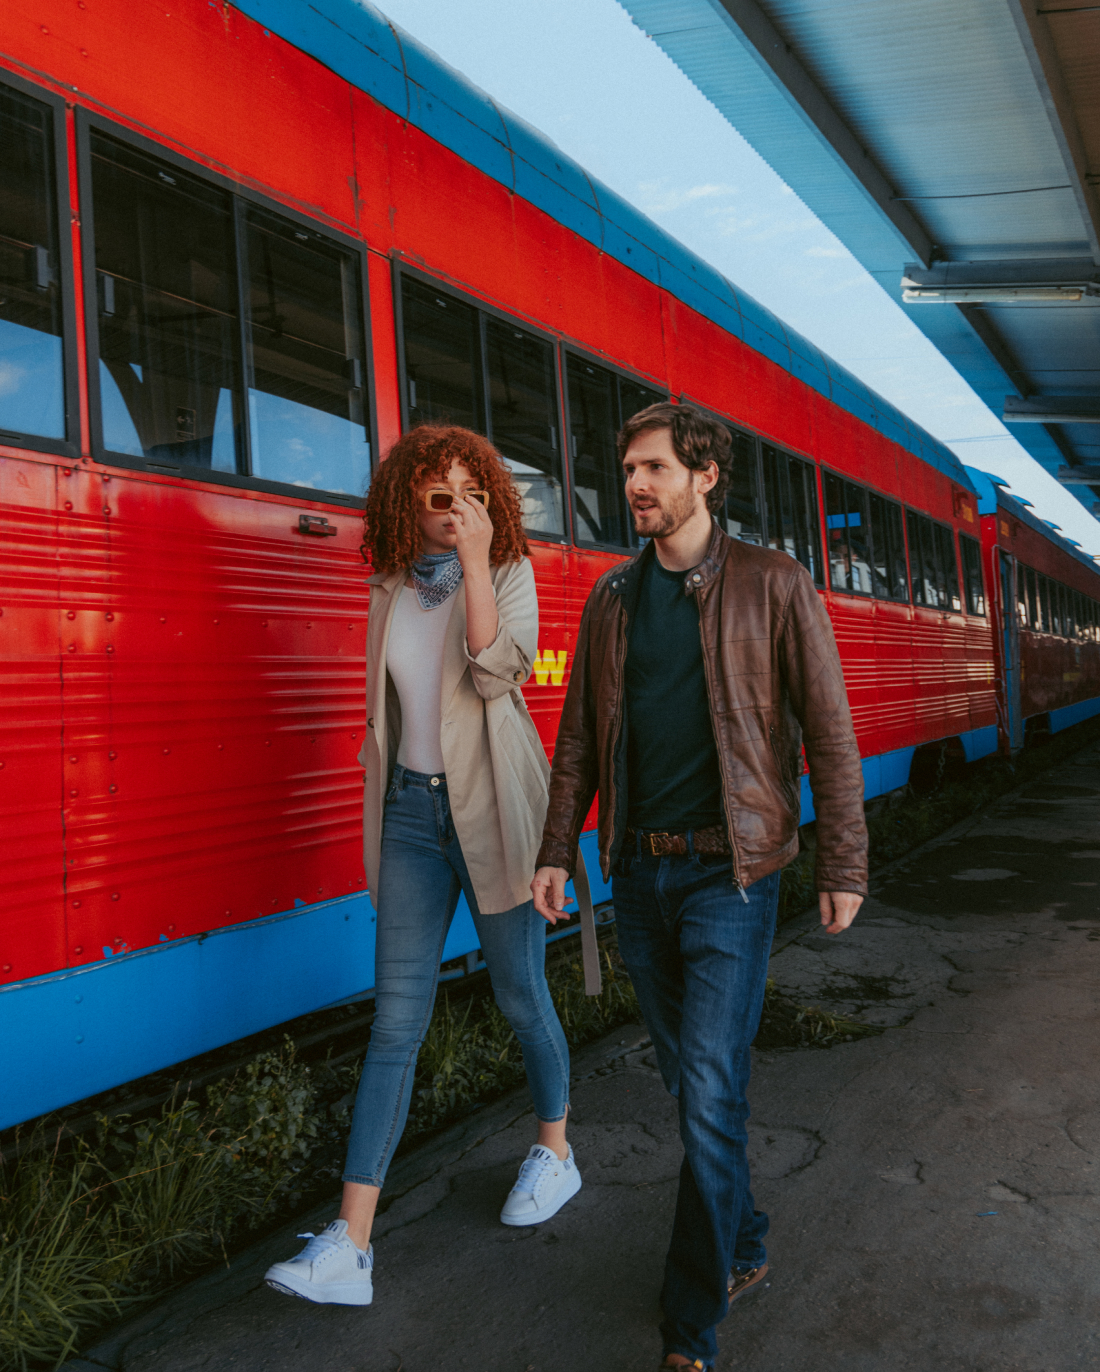 A woman with curly hair and sunglasses and a man with a beard walk along a train platform beside a bright red and blue train. She wears a beige coat and jeans, while he wears a brown leather jacket and jeans. The sky is visible through the platform roof.